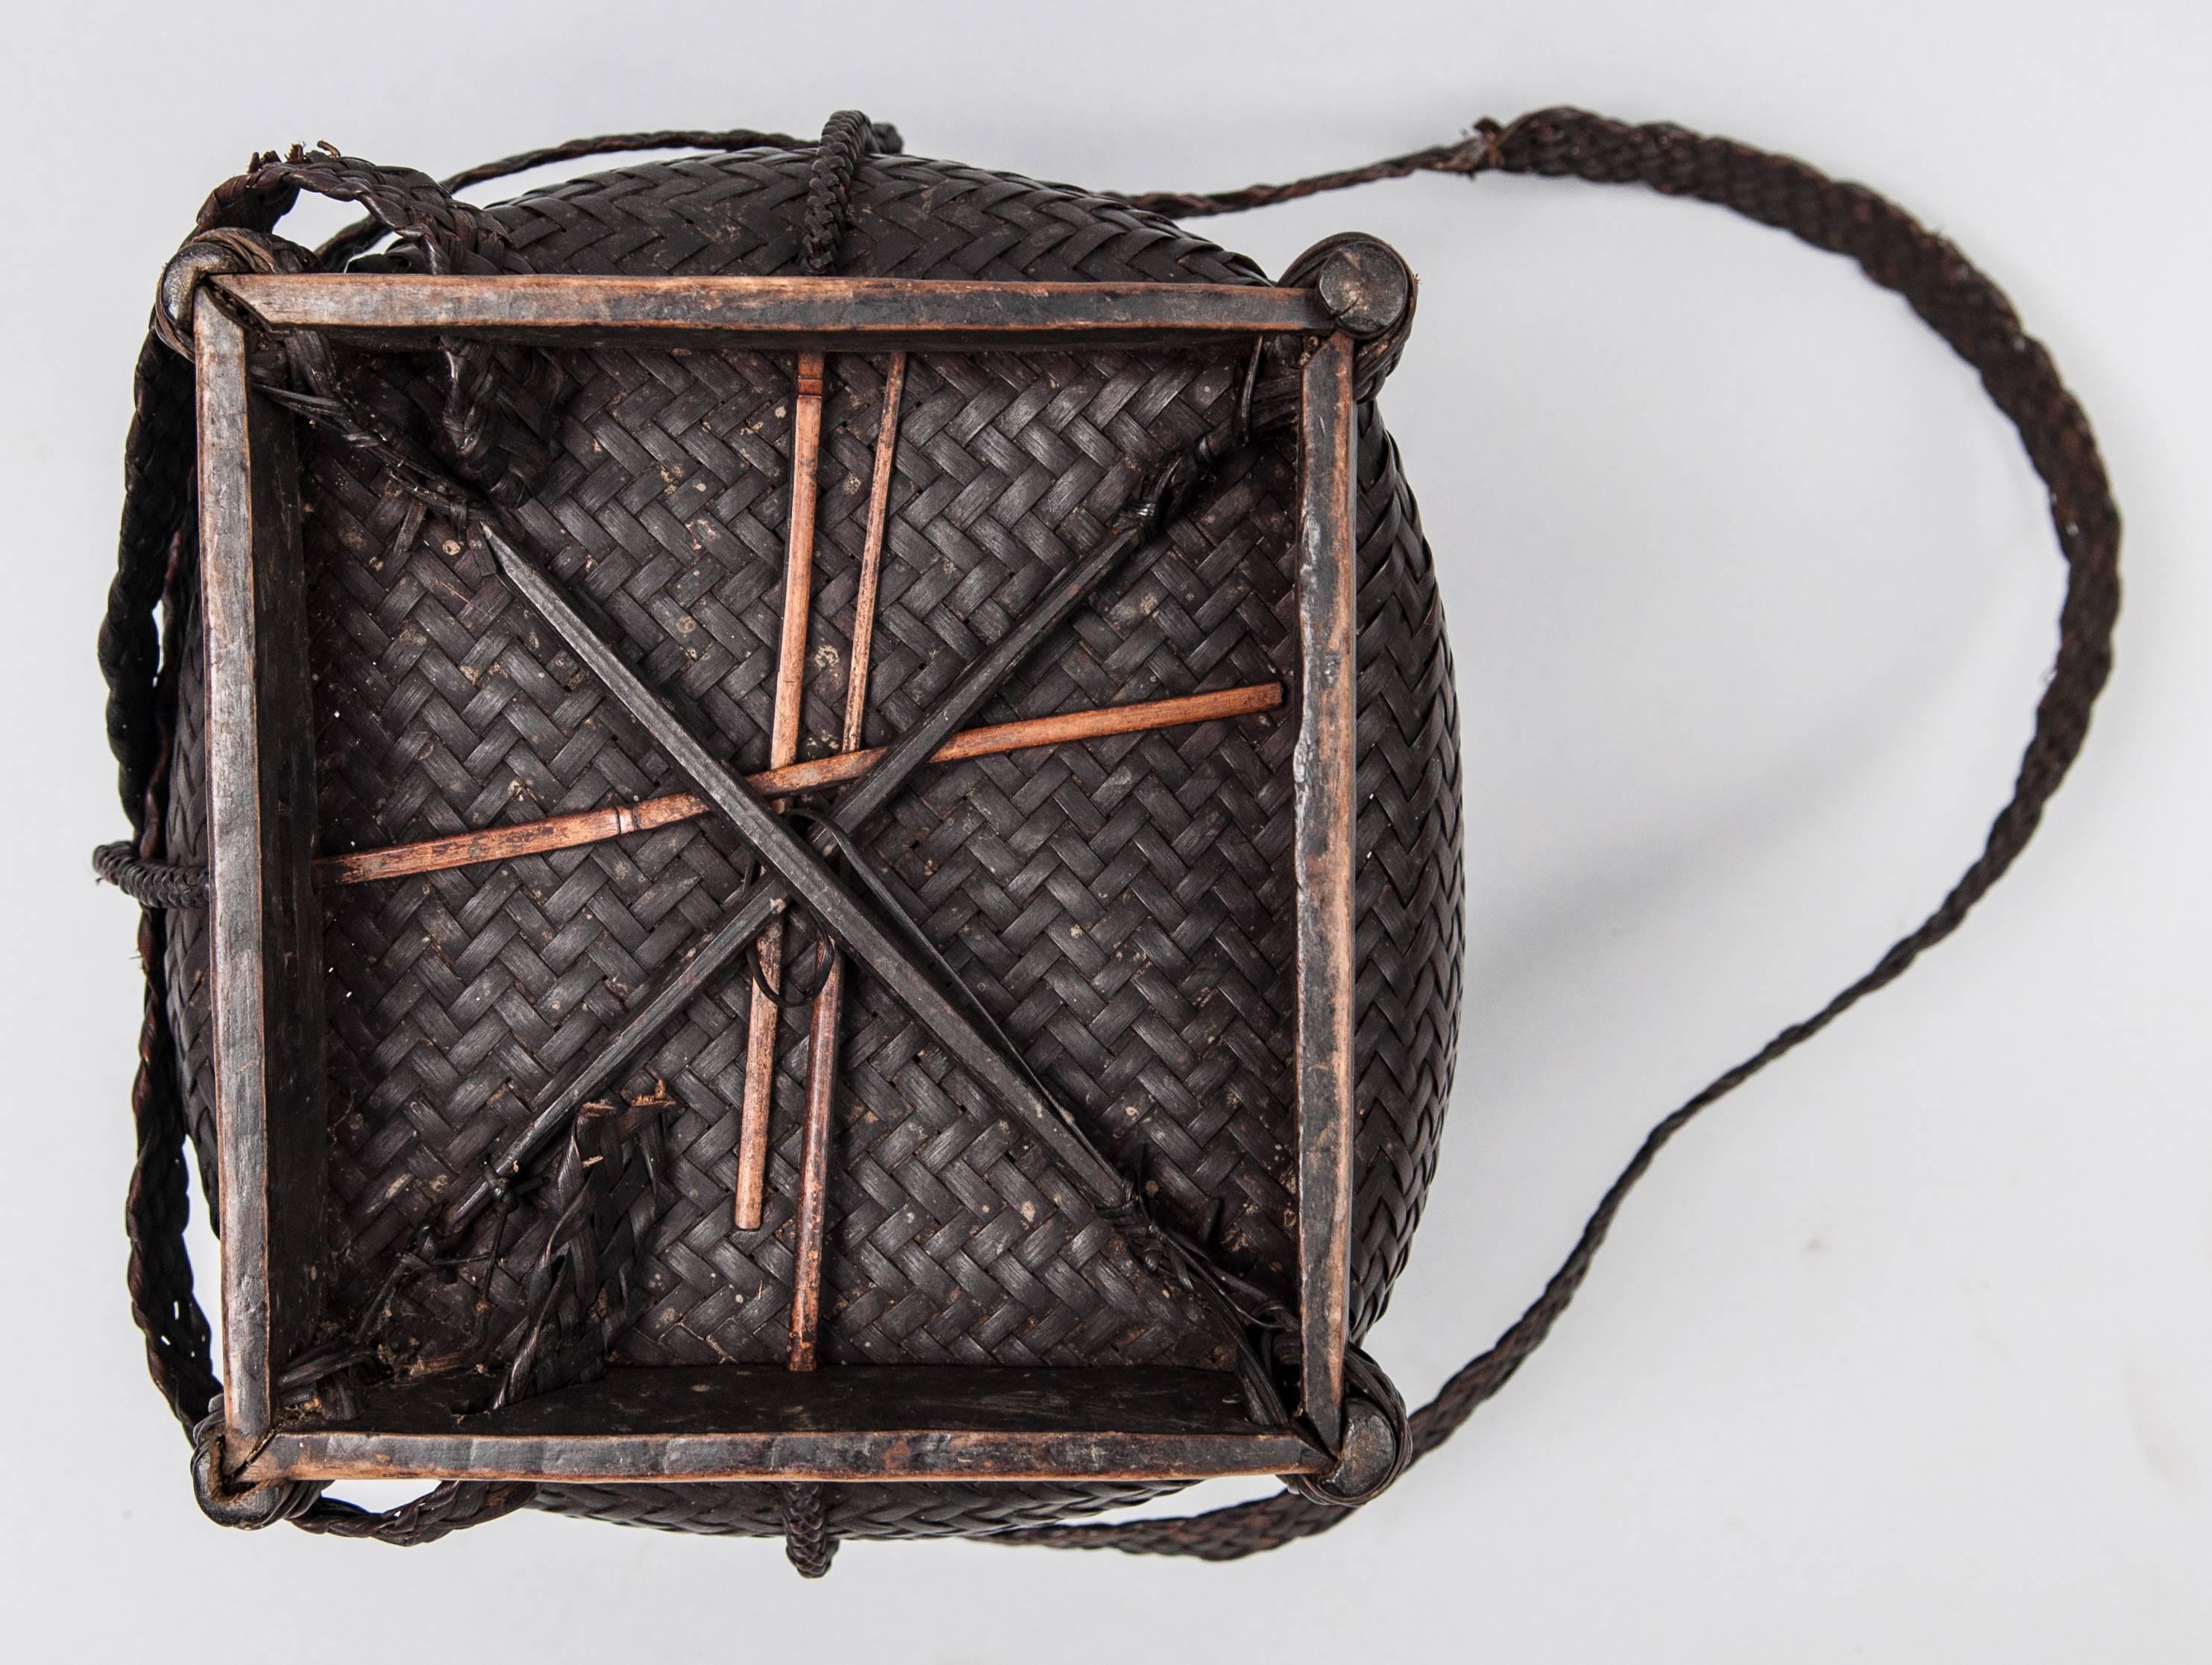 Laotian Collecting Basket from Ata Pue Area of Laos, Mid-20th Century, Bamboo, Rattan